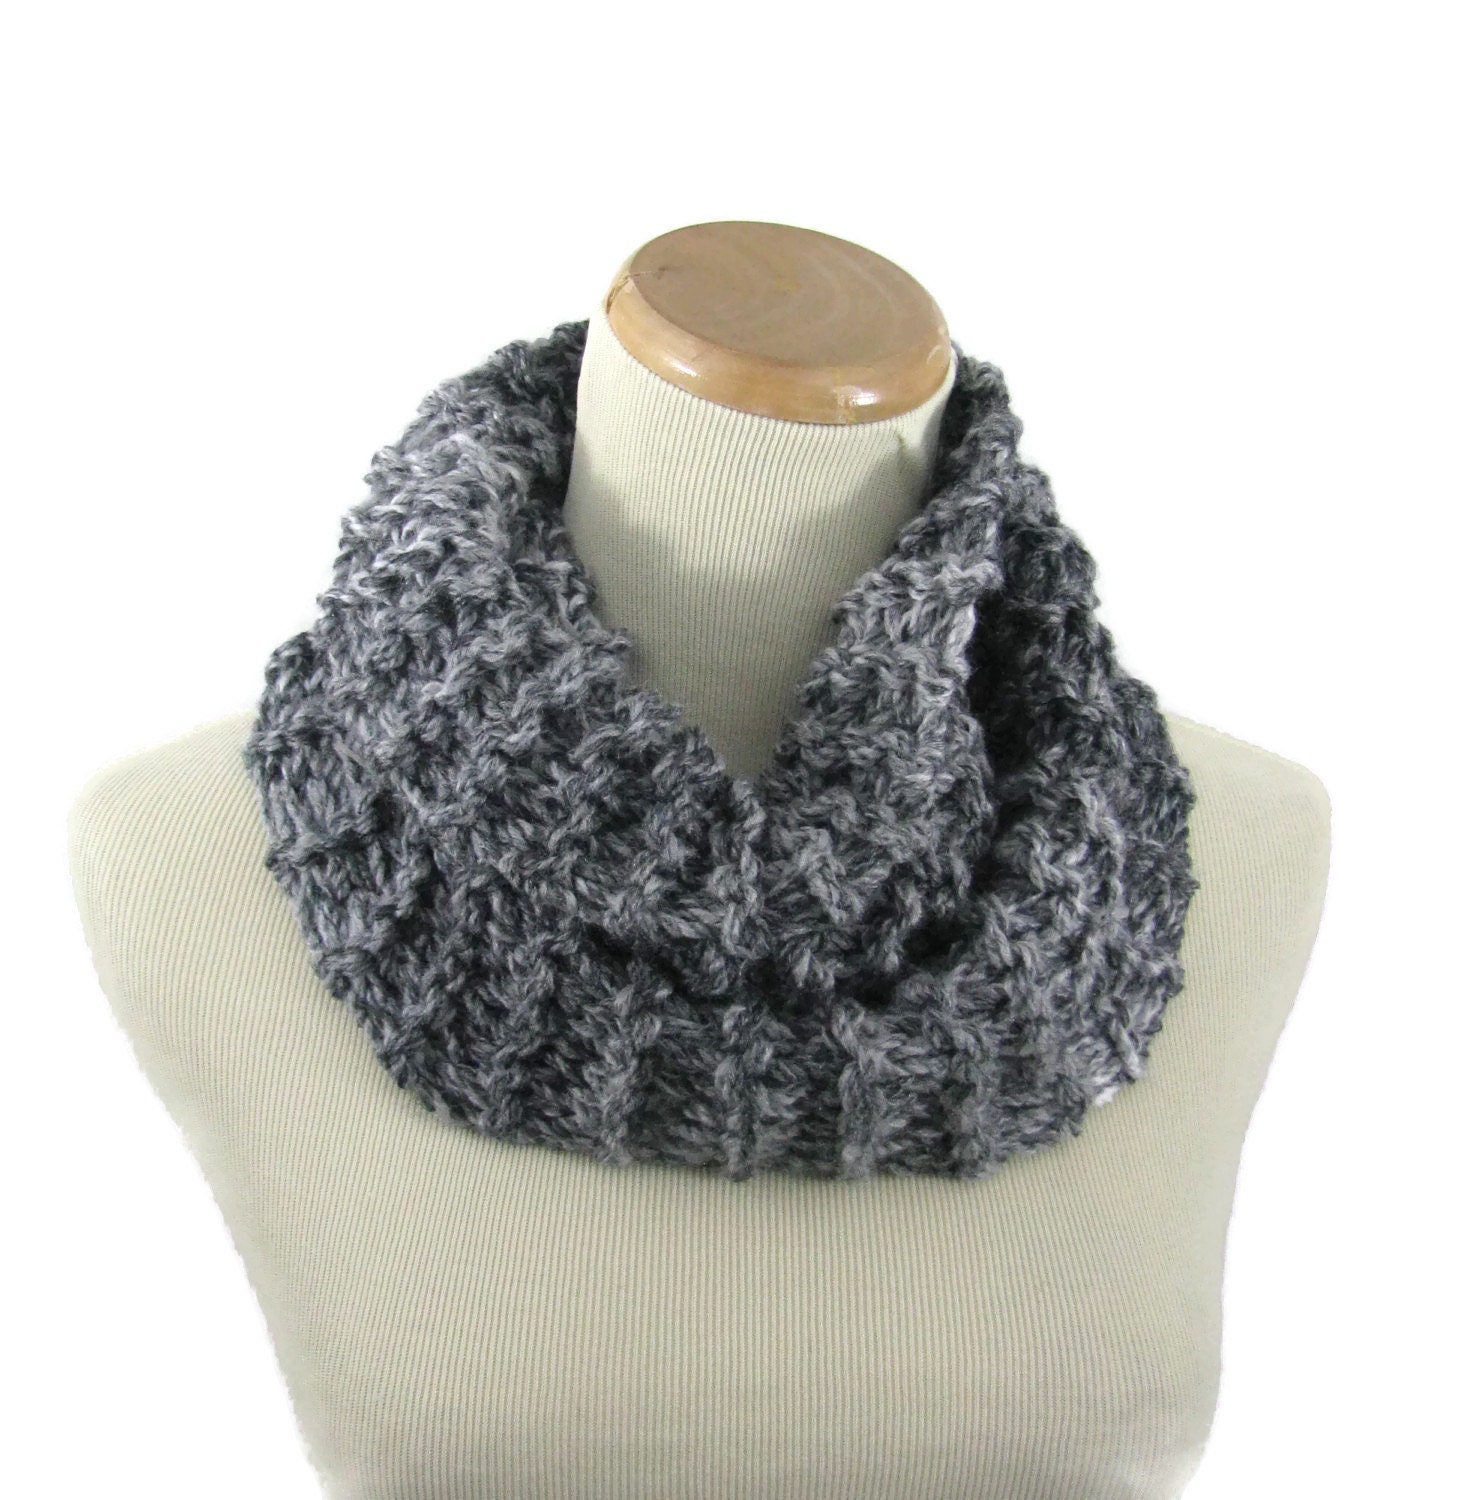 Hand Knit Cowl Neck Warmer Knit Scarf Bulky Scarf Circle